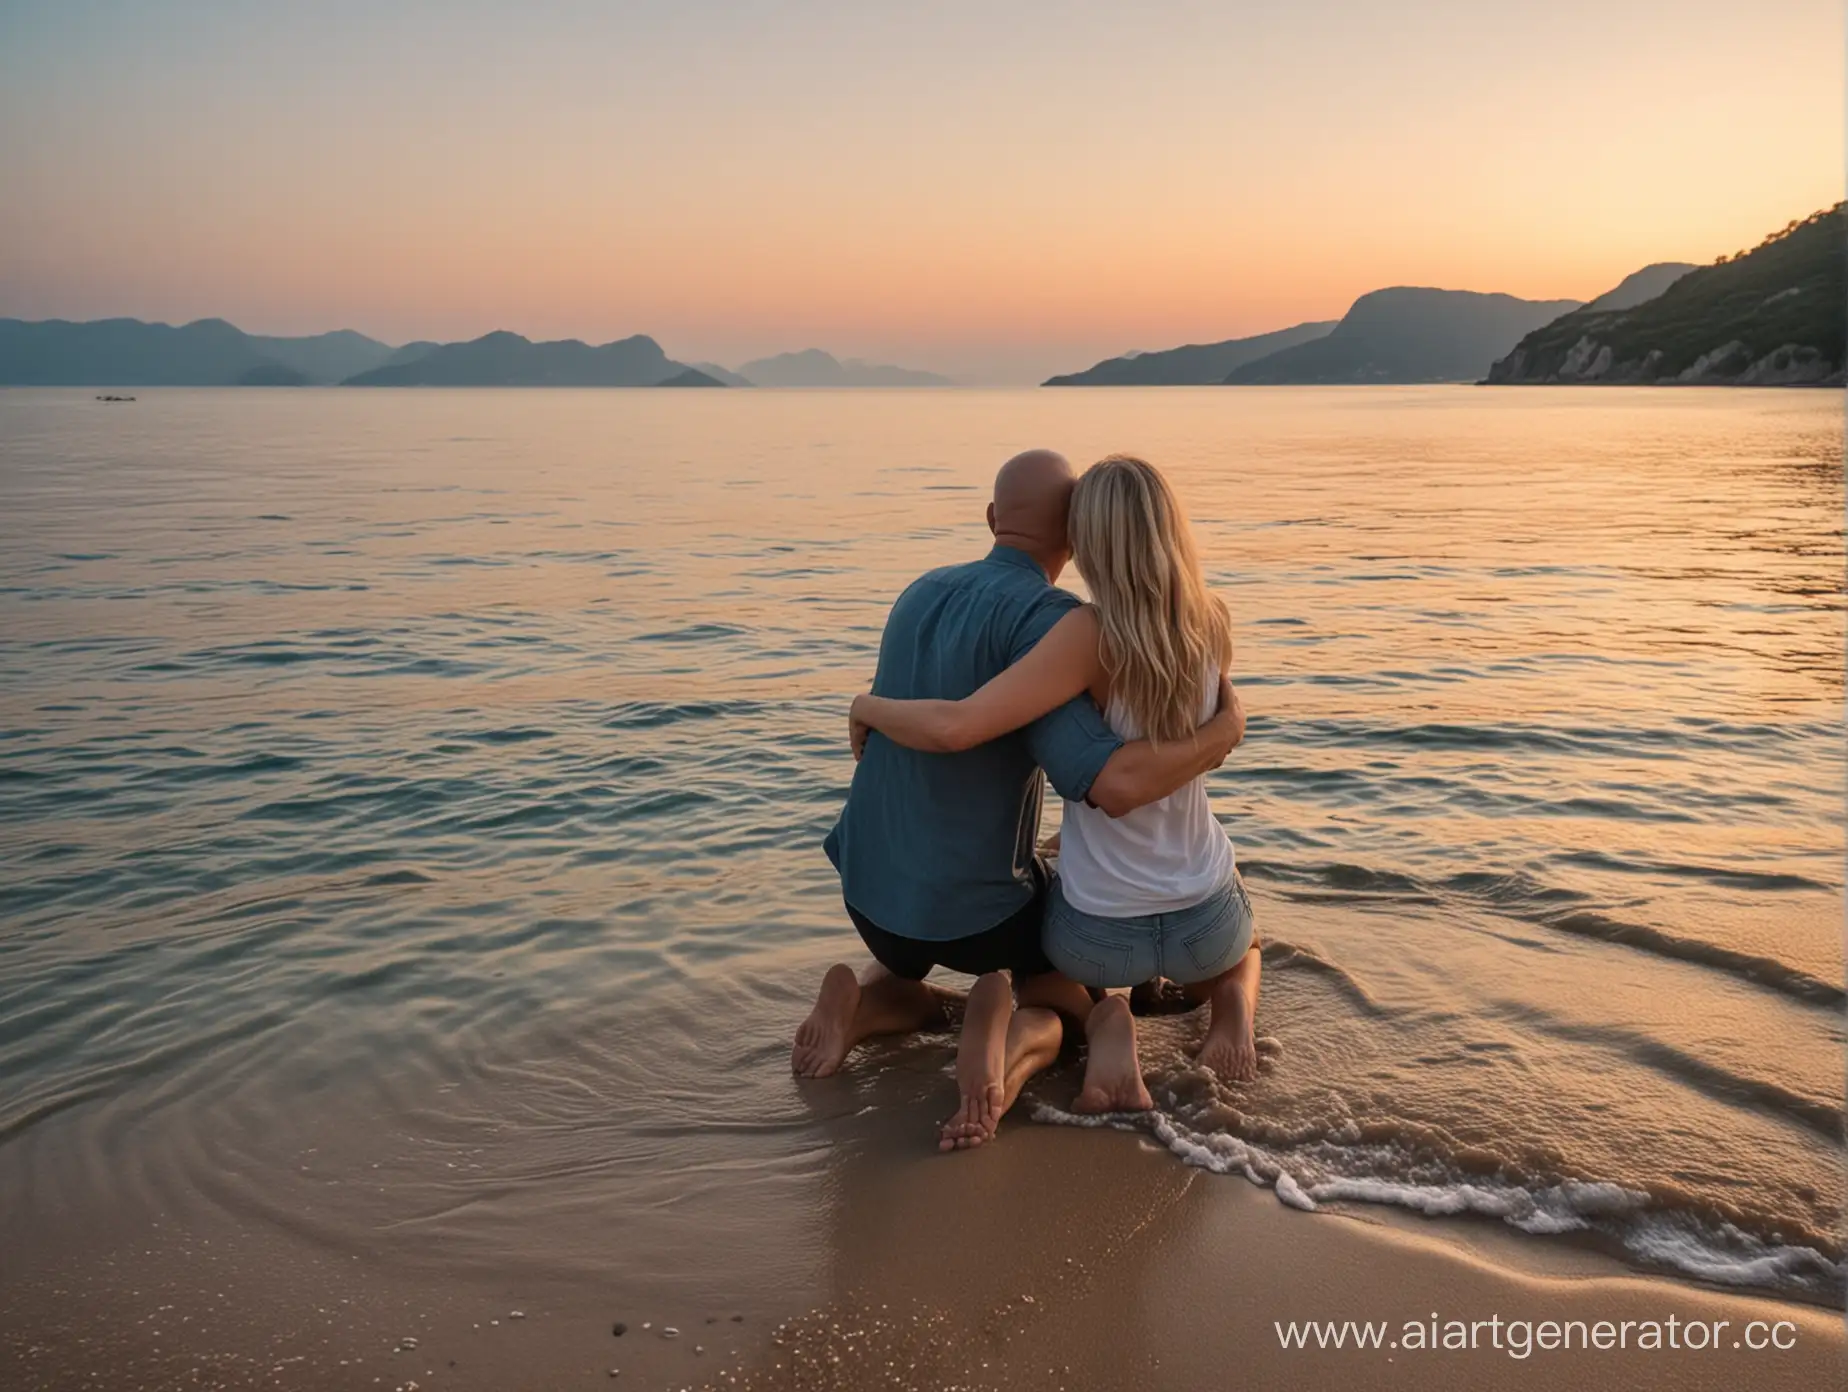 Couple-Embracing-by-Seaside-Sunset-with-Island-View